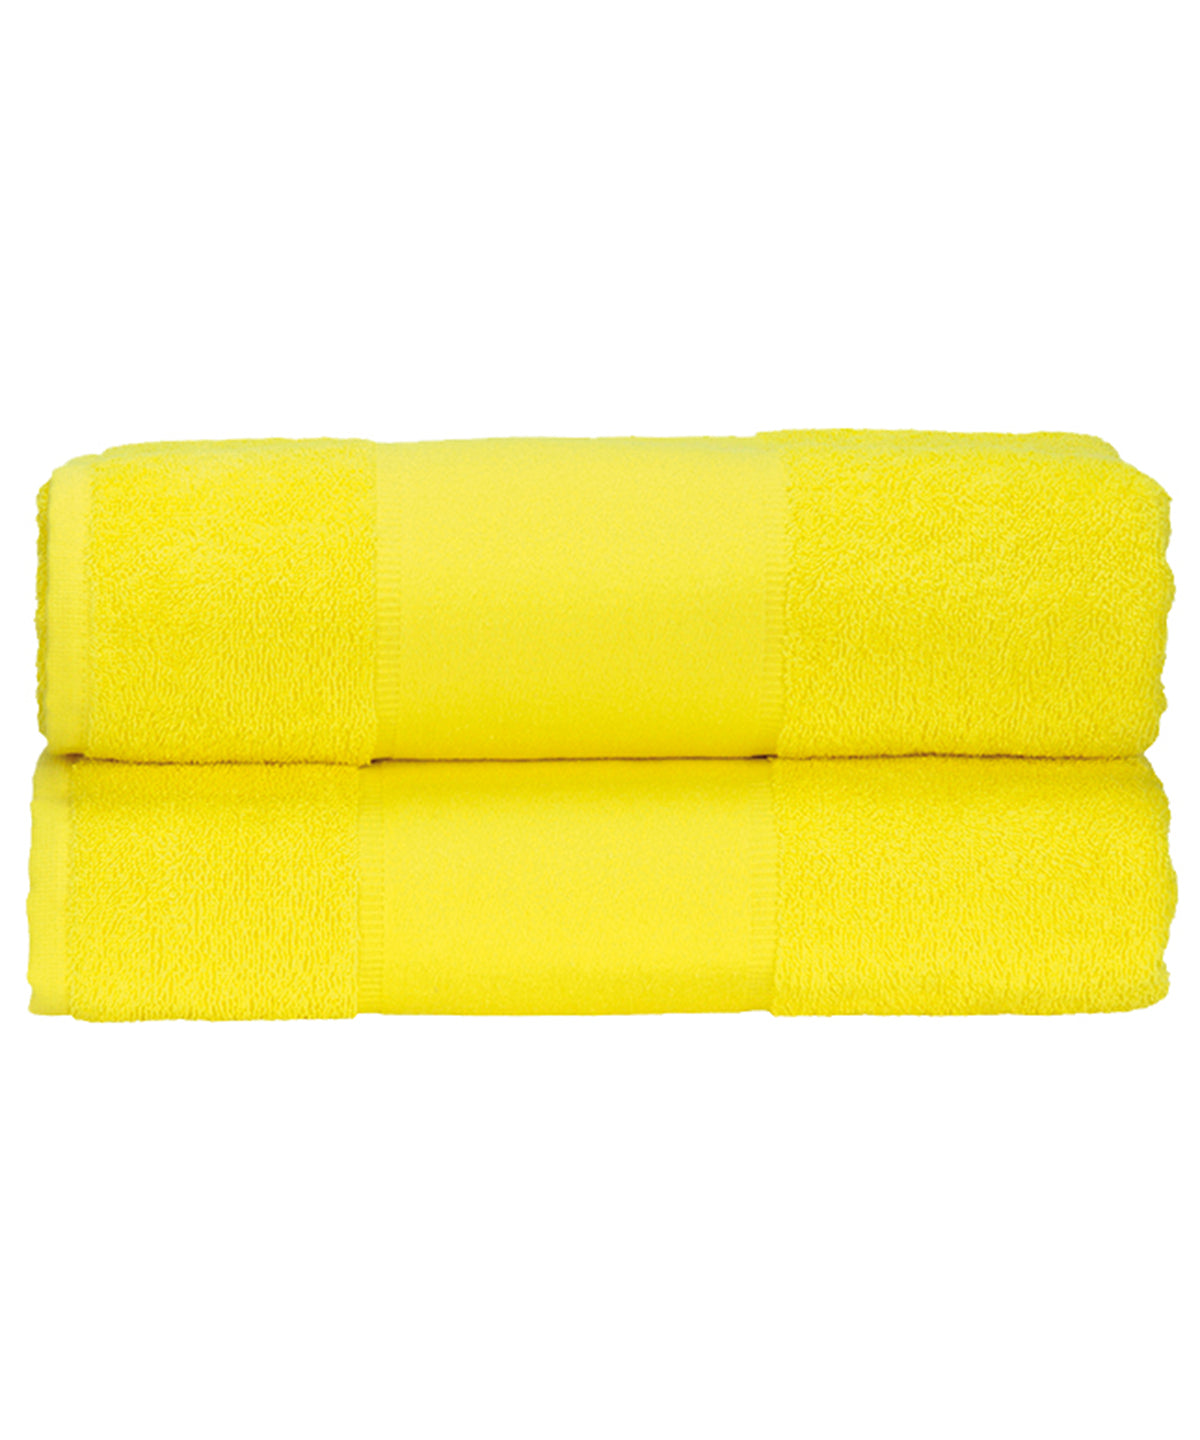 Personalised Towels - Light Yellow A&R Towels ARTG® PRINT-Me® guest towel